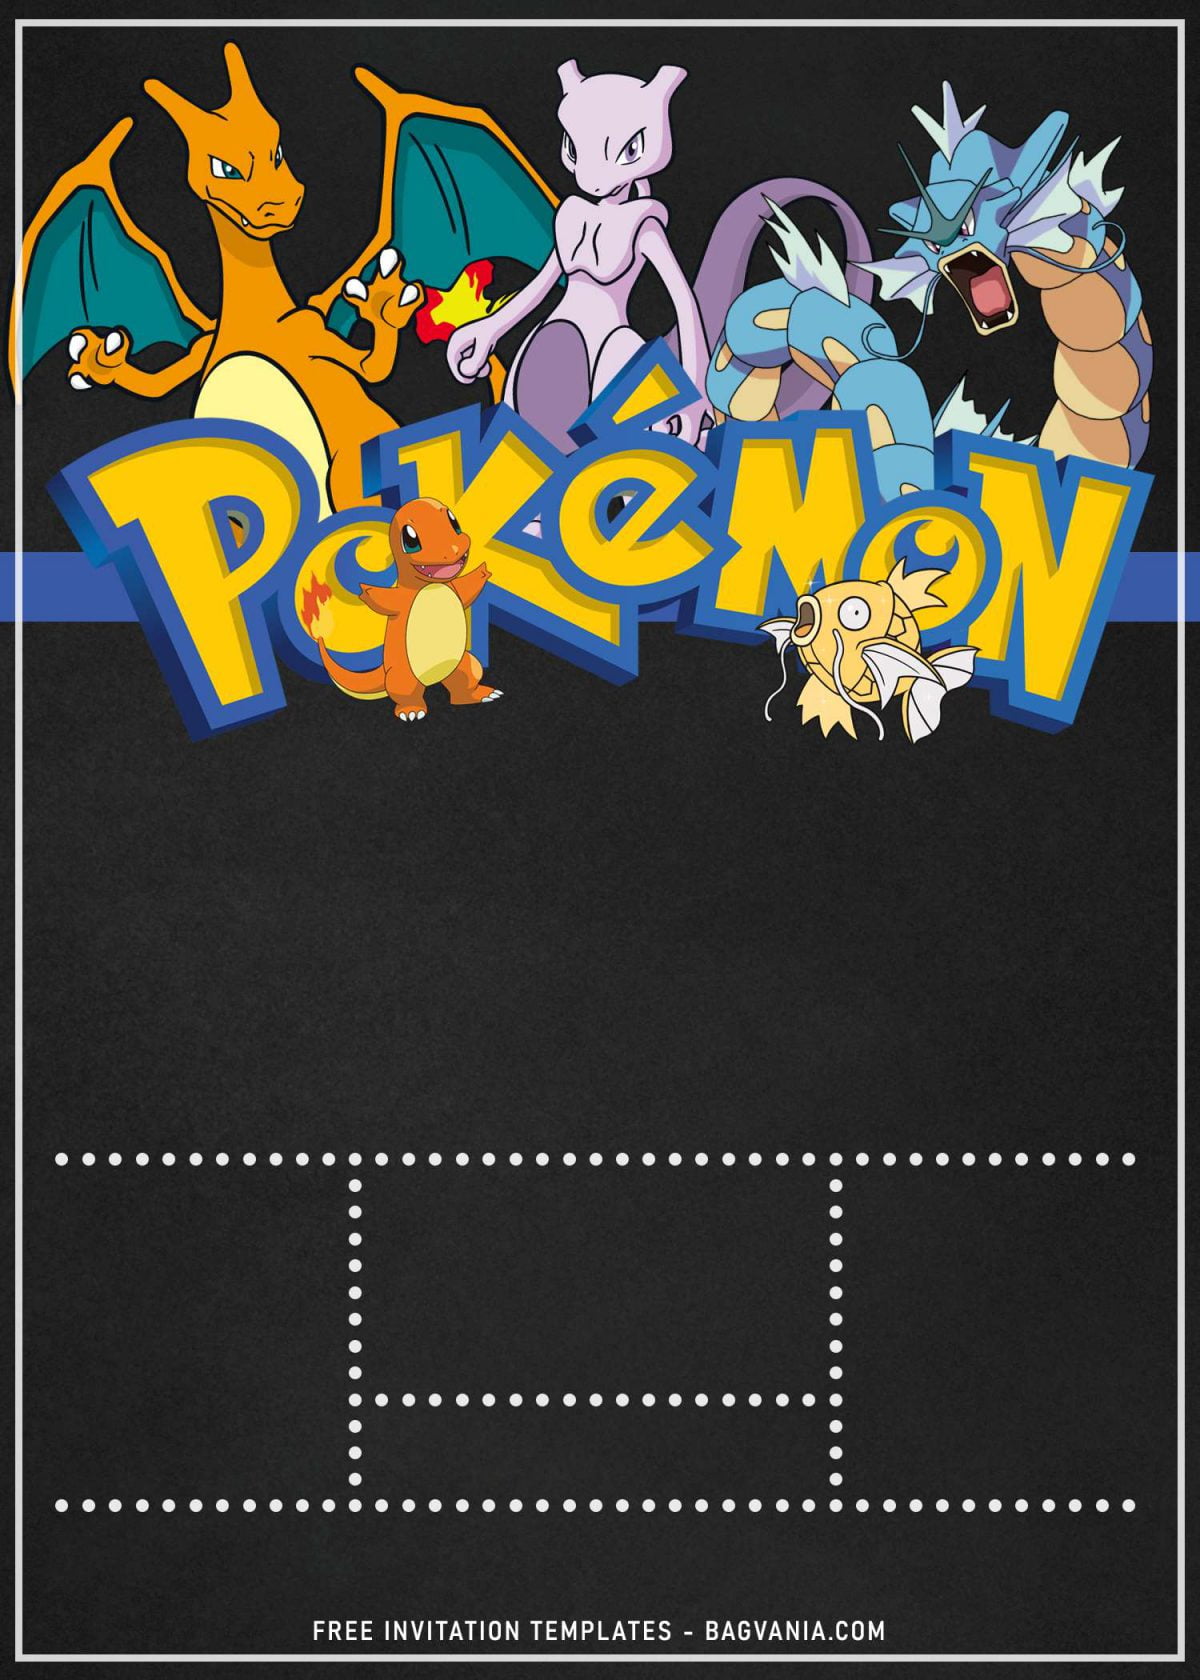 11+ Awesome Pokemon Chalkboard Invitation Templates For Boys Birthday Party...